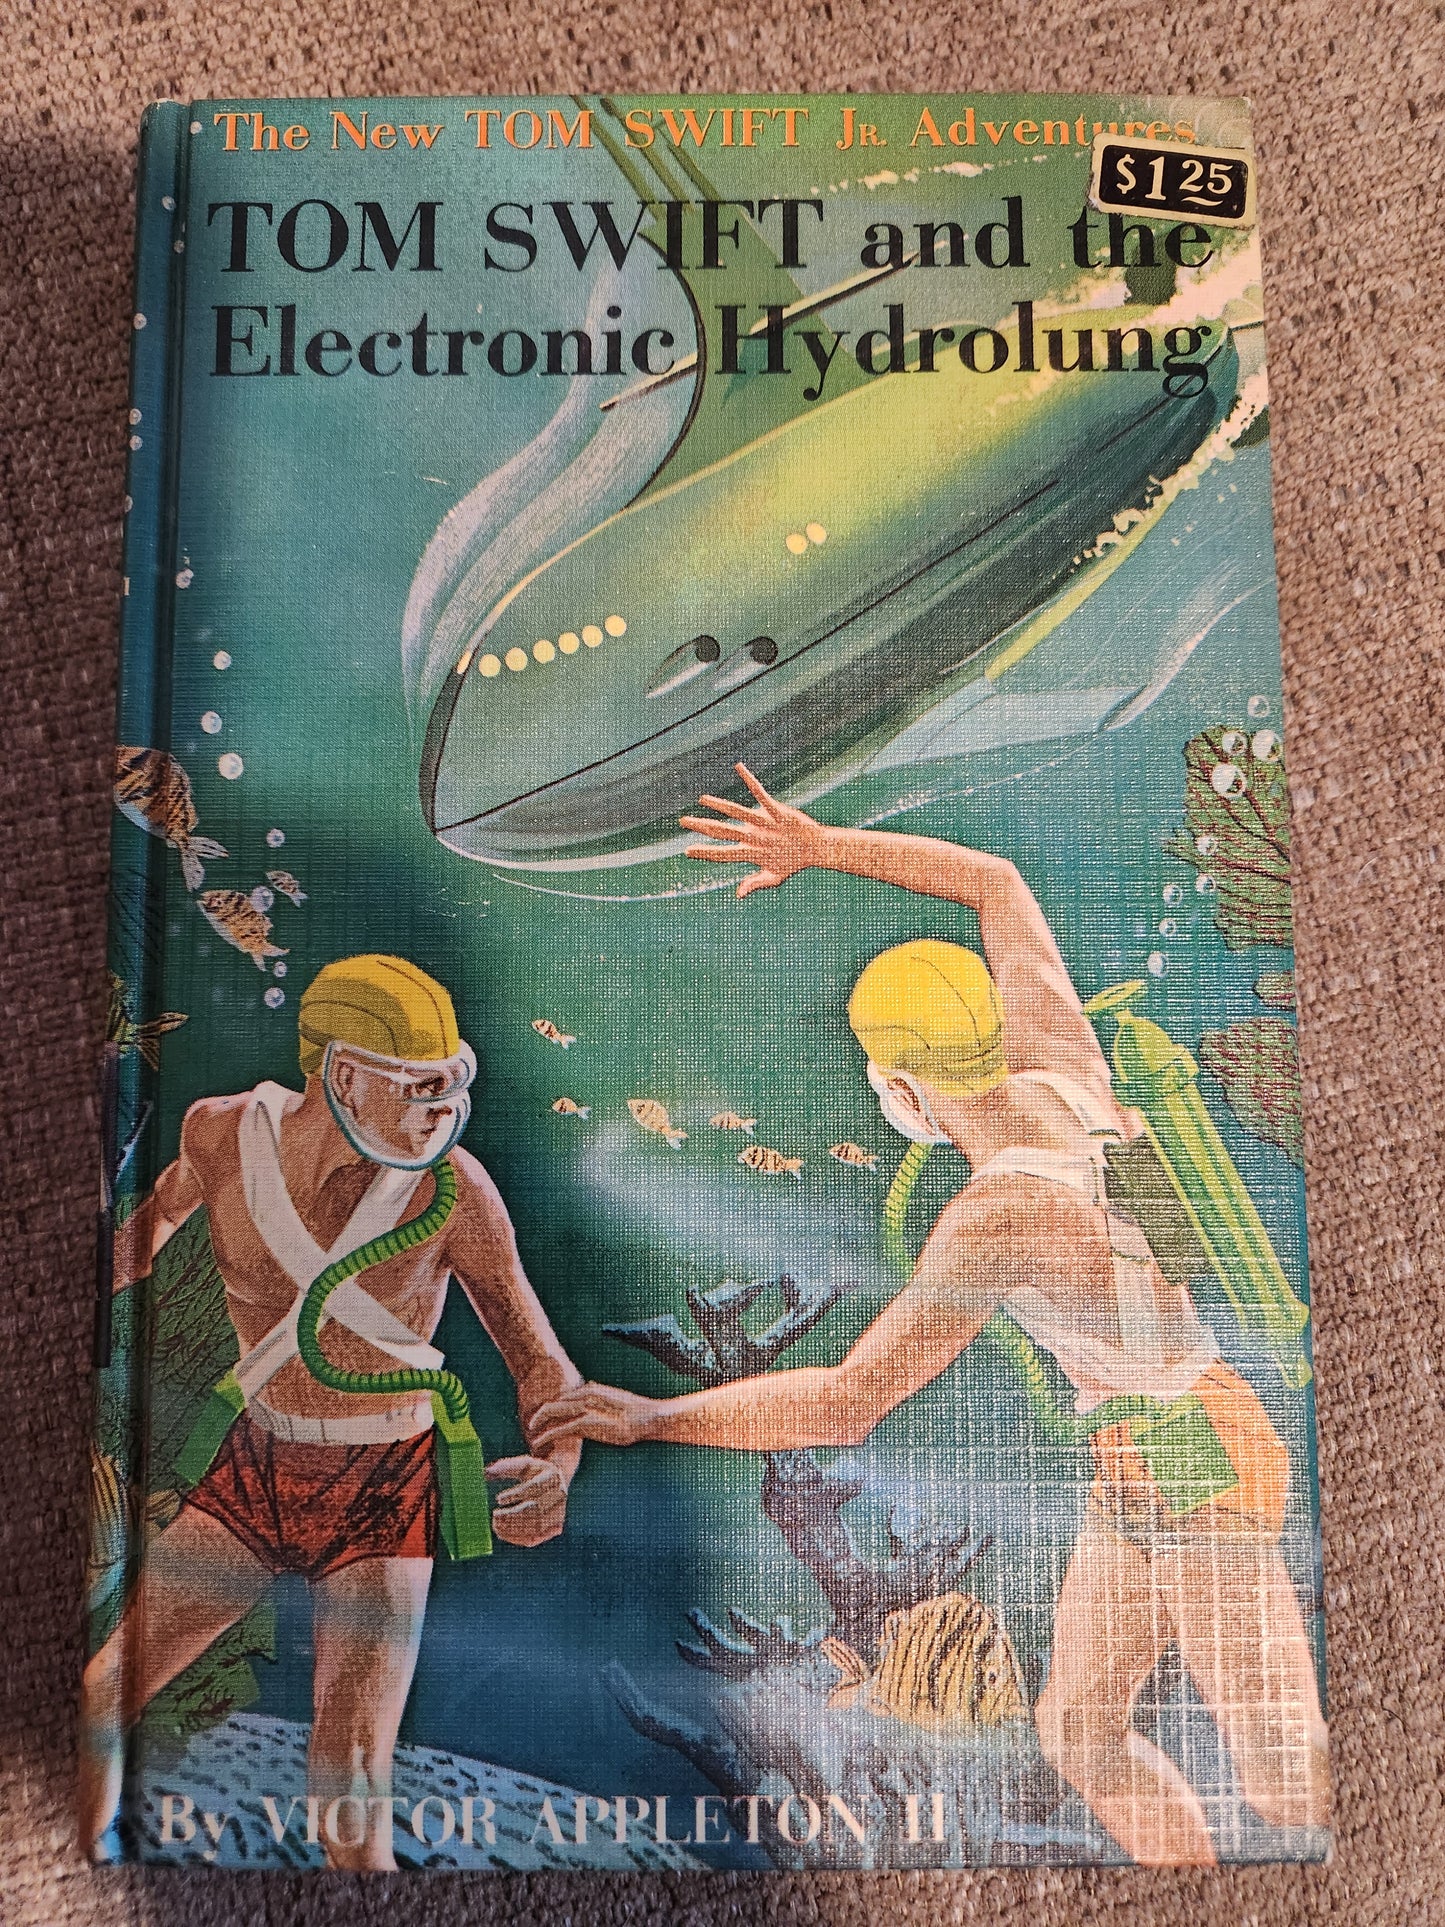 "Tom Swift and his Electronic Hydrolung", By Victor Appleton II (Blue spine)